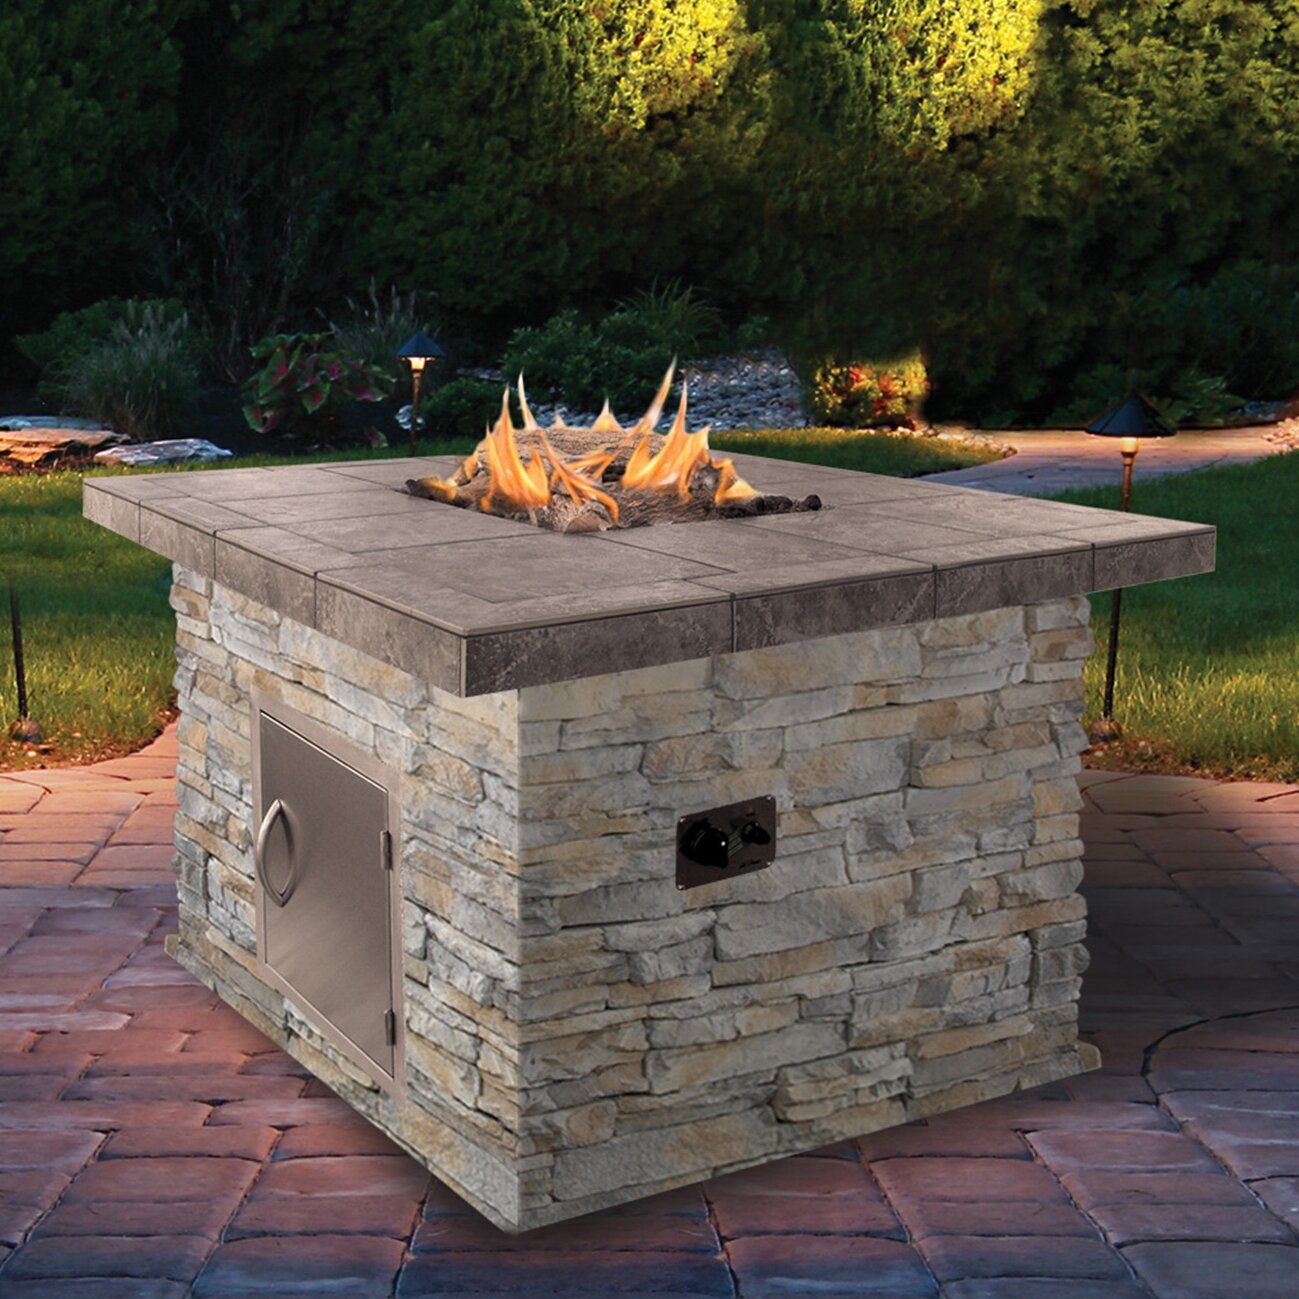 CalFlame Natural Stone Propane Gas Fire Pit & Reviews ...